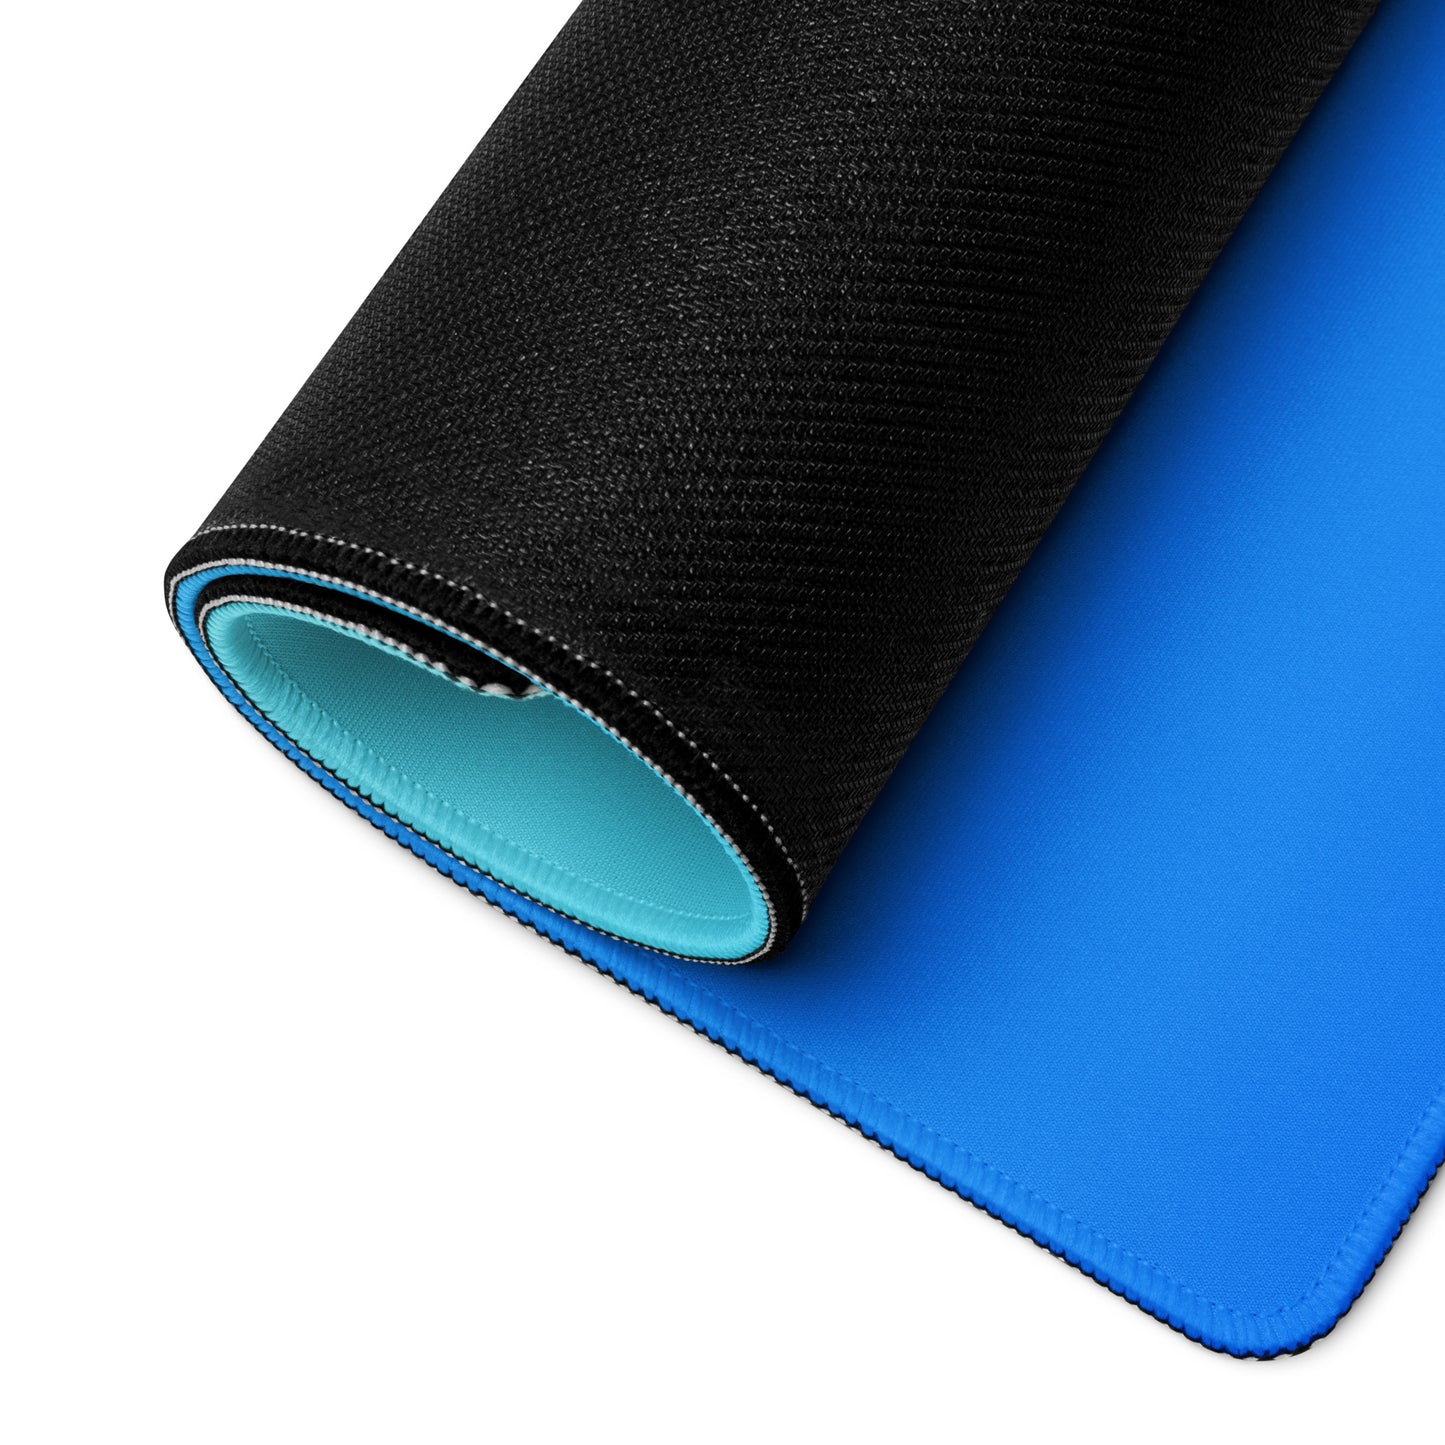 A gaming desk pad with dark blue at the bottom and light blue at the top. The desk pad is rolled up.